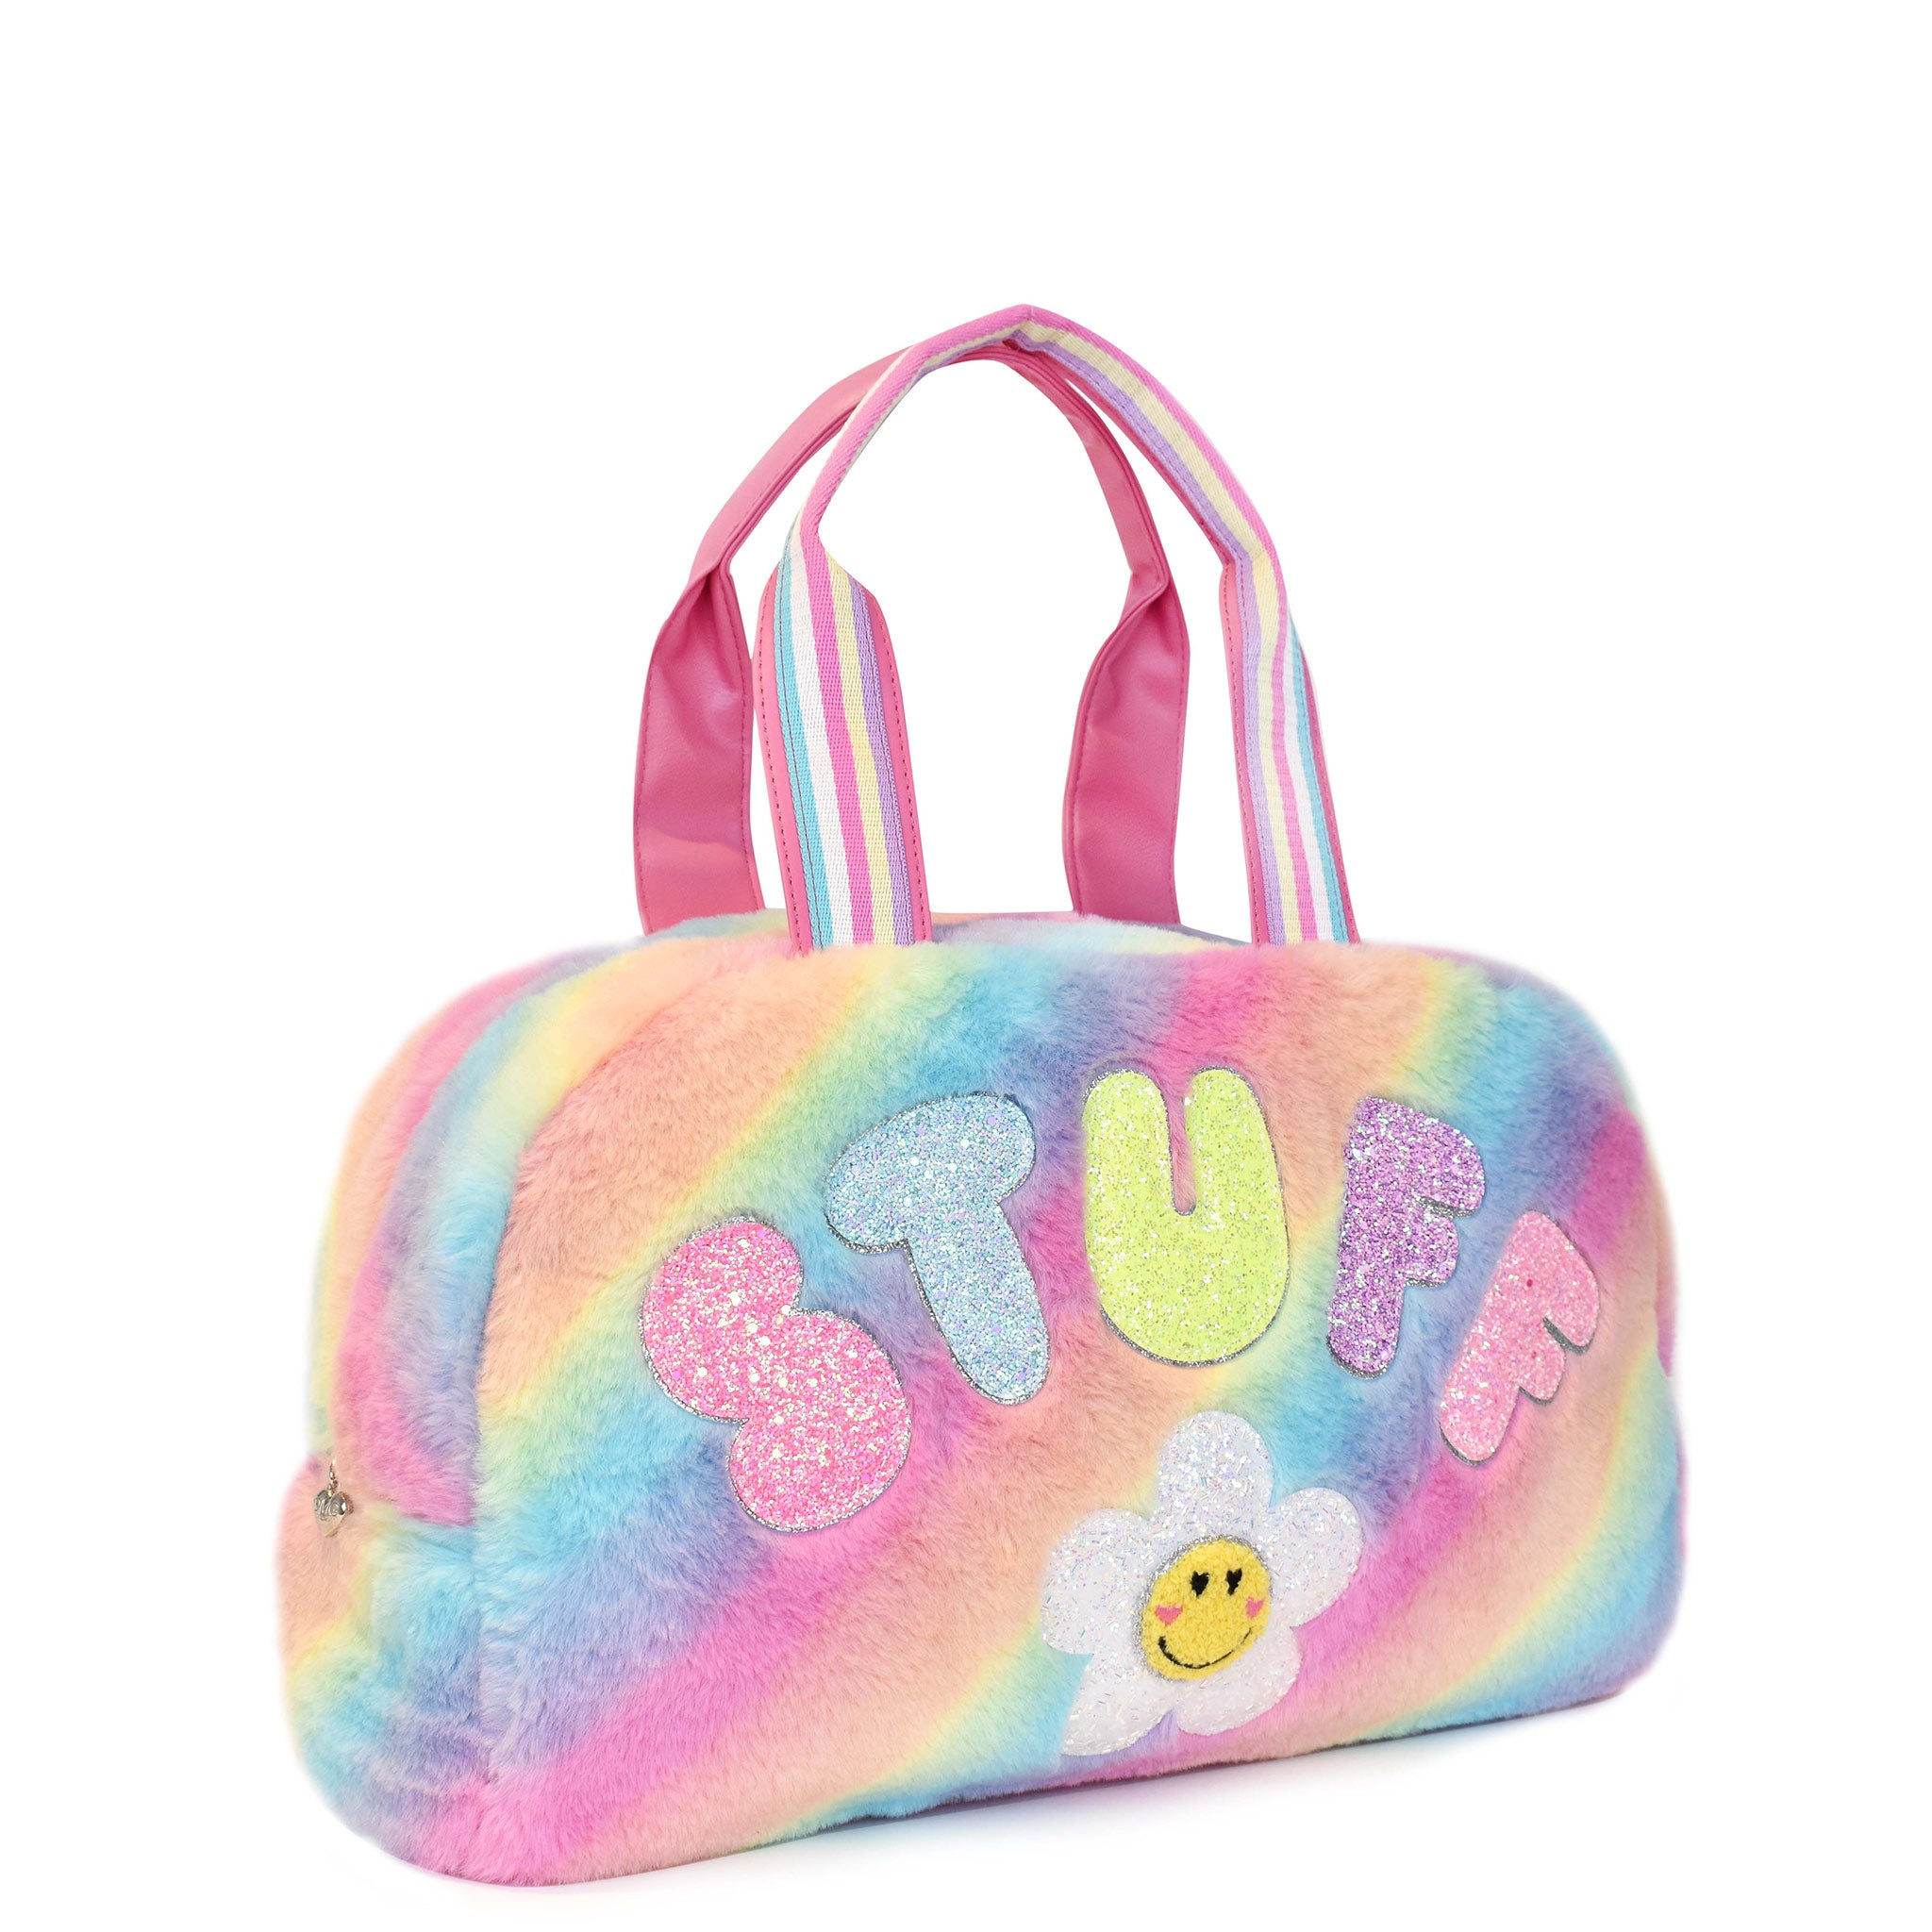 Side view of a rainbow ombre plush medium duffle bag with glitter bubble letters 'Stuff' and a daisy patch applique